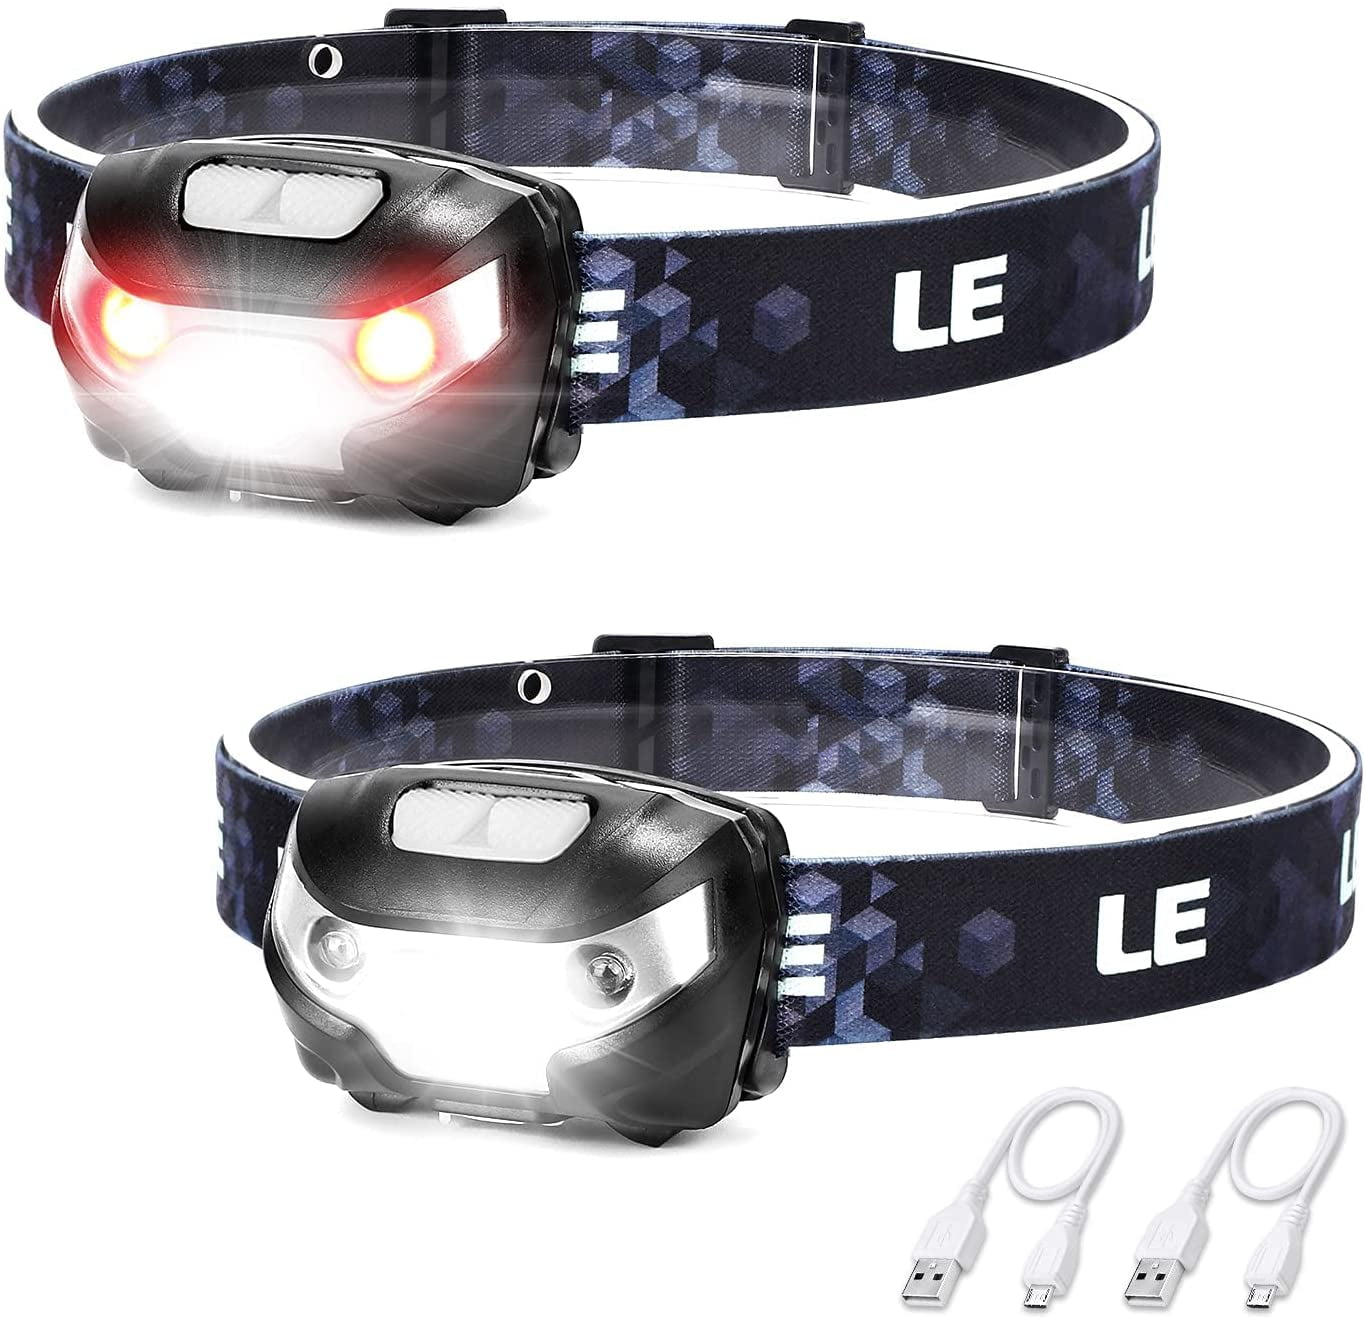 Lepro LED Headlamp Rechargeable L3200 High Lumen Super Bright LED Head Lamp  with Modes and White Red Light, Waterproof Forehead Flashlight for Outdoor  Camping, Hiking, Hunting, Running